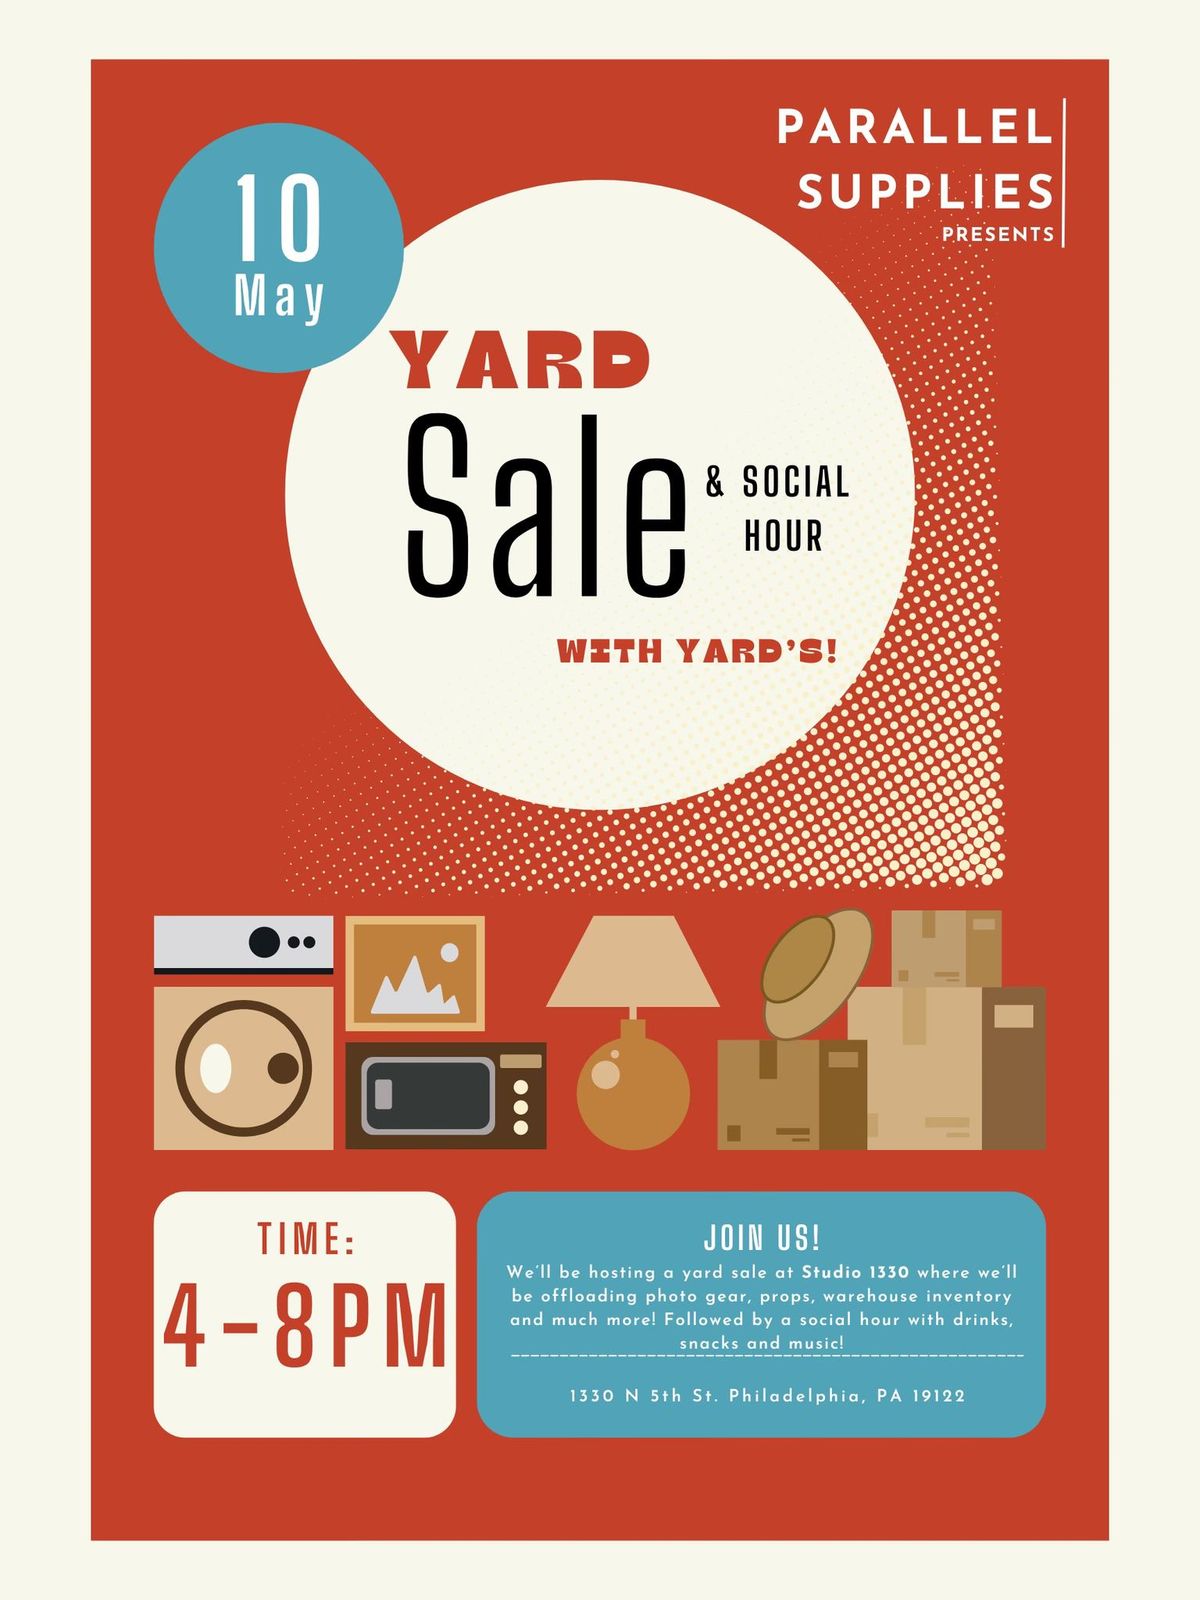 Parallel's Yard Sale with Yard's!